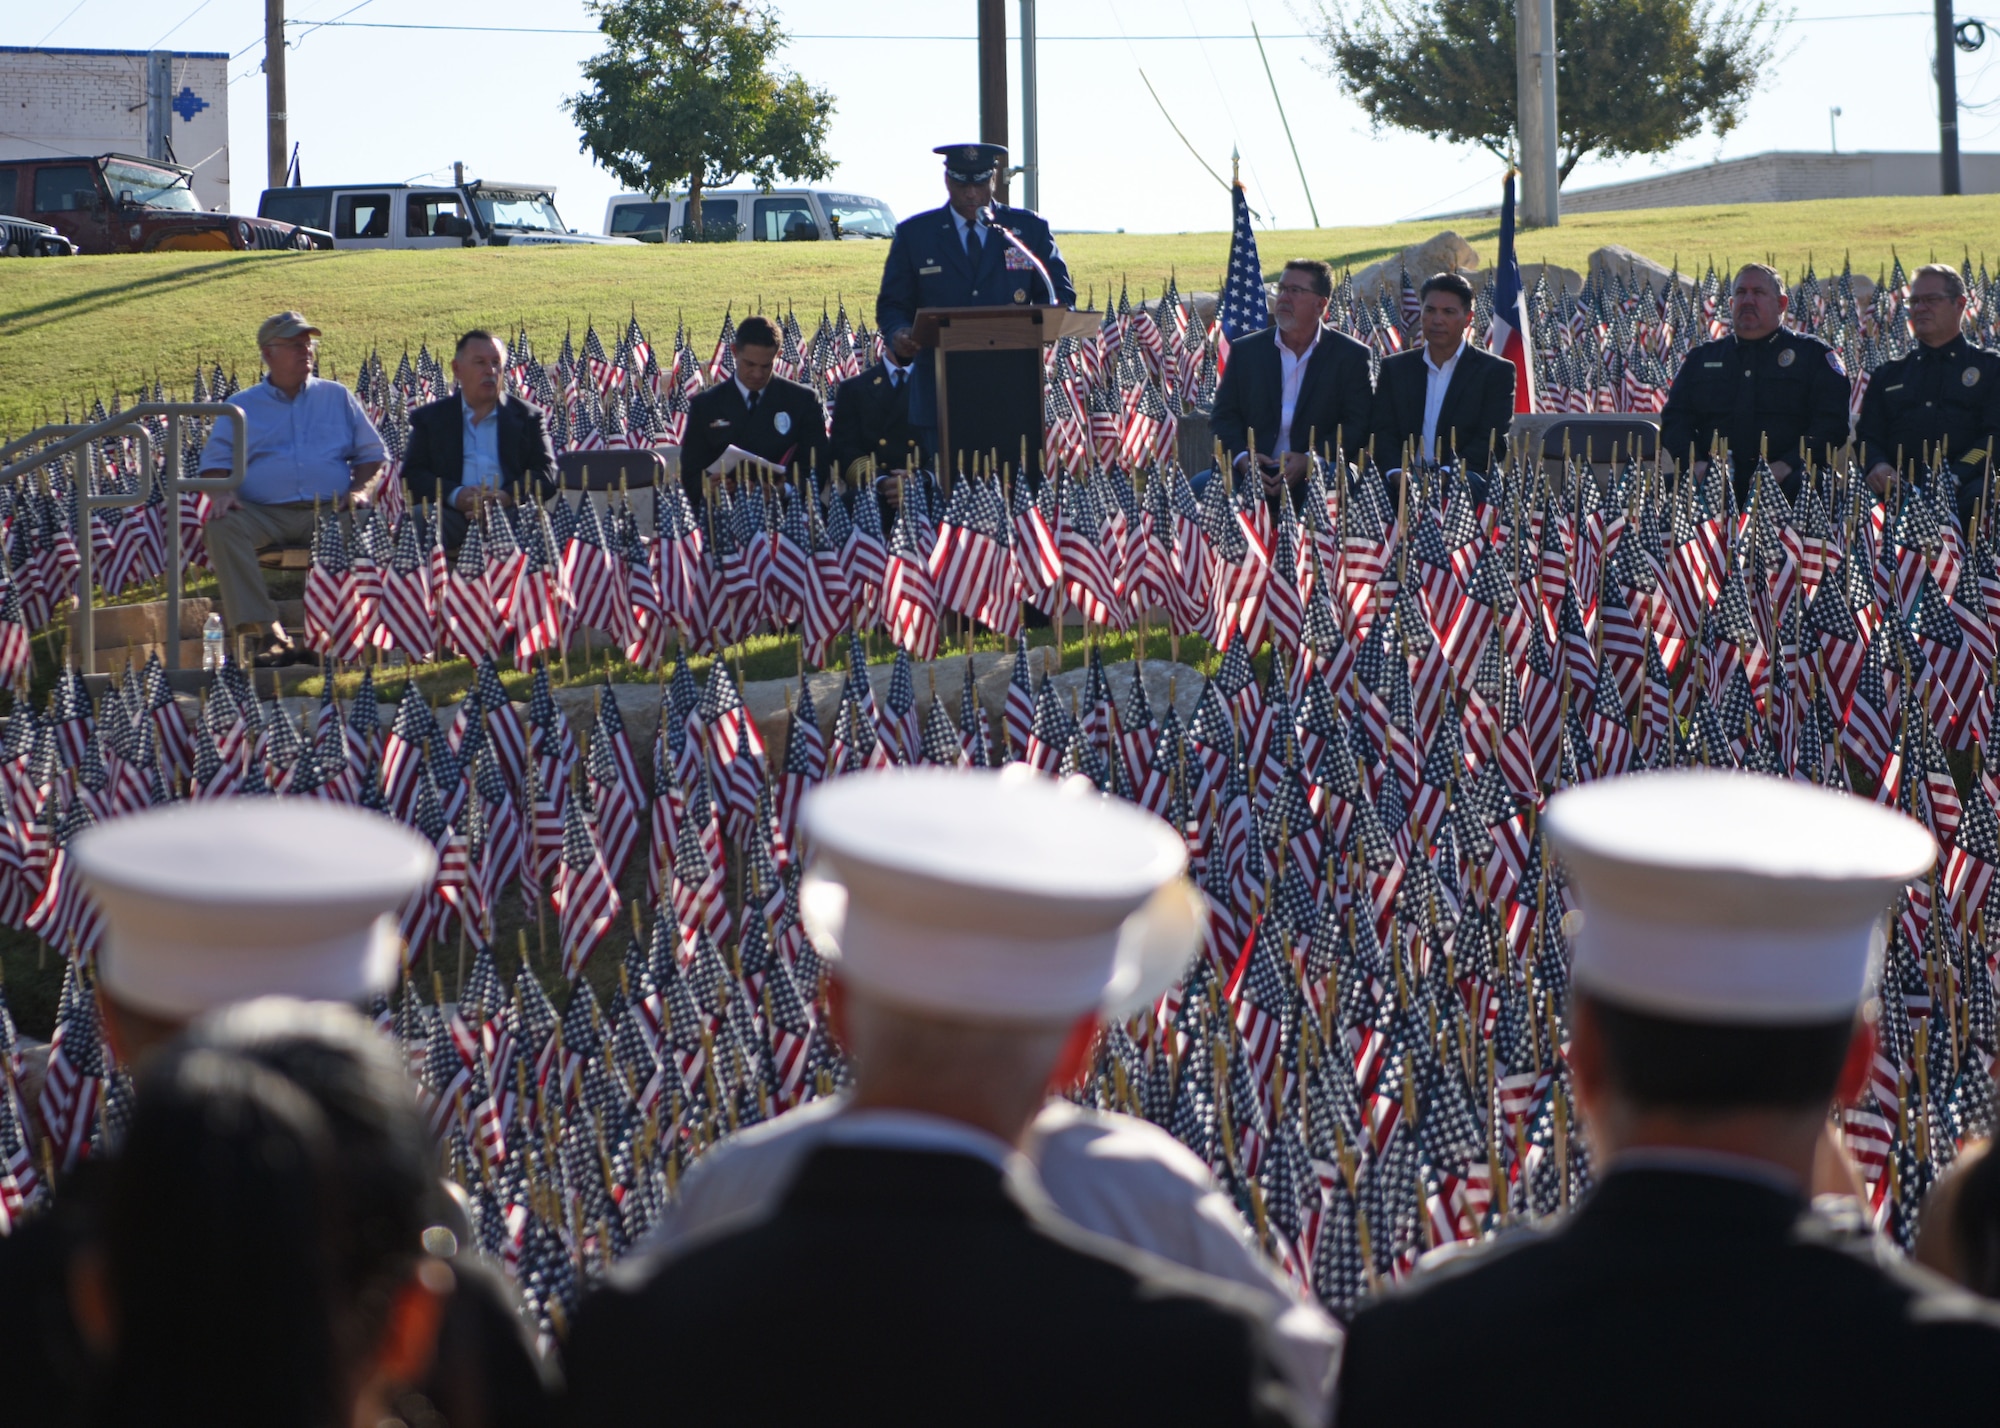 U.S. Air Force Col. Eugene Moore, 17th Mission Support Group commander, gives a speech during a 9/11 remembrance ceremony at San Angelo, Texas, Sept. 9, 2022. Moore spoke on the events of 9/11 and the courageous actions of average citizens and first responders. (U.S. Air Force photo by Senior Airman Ethan Sherwood)